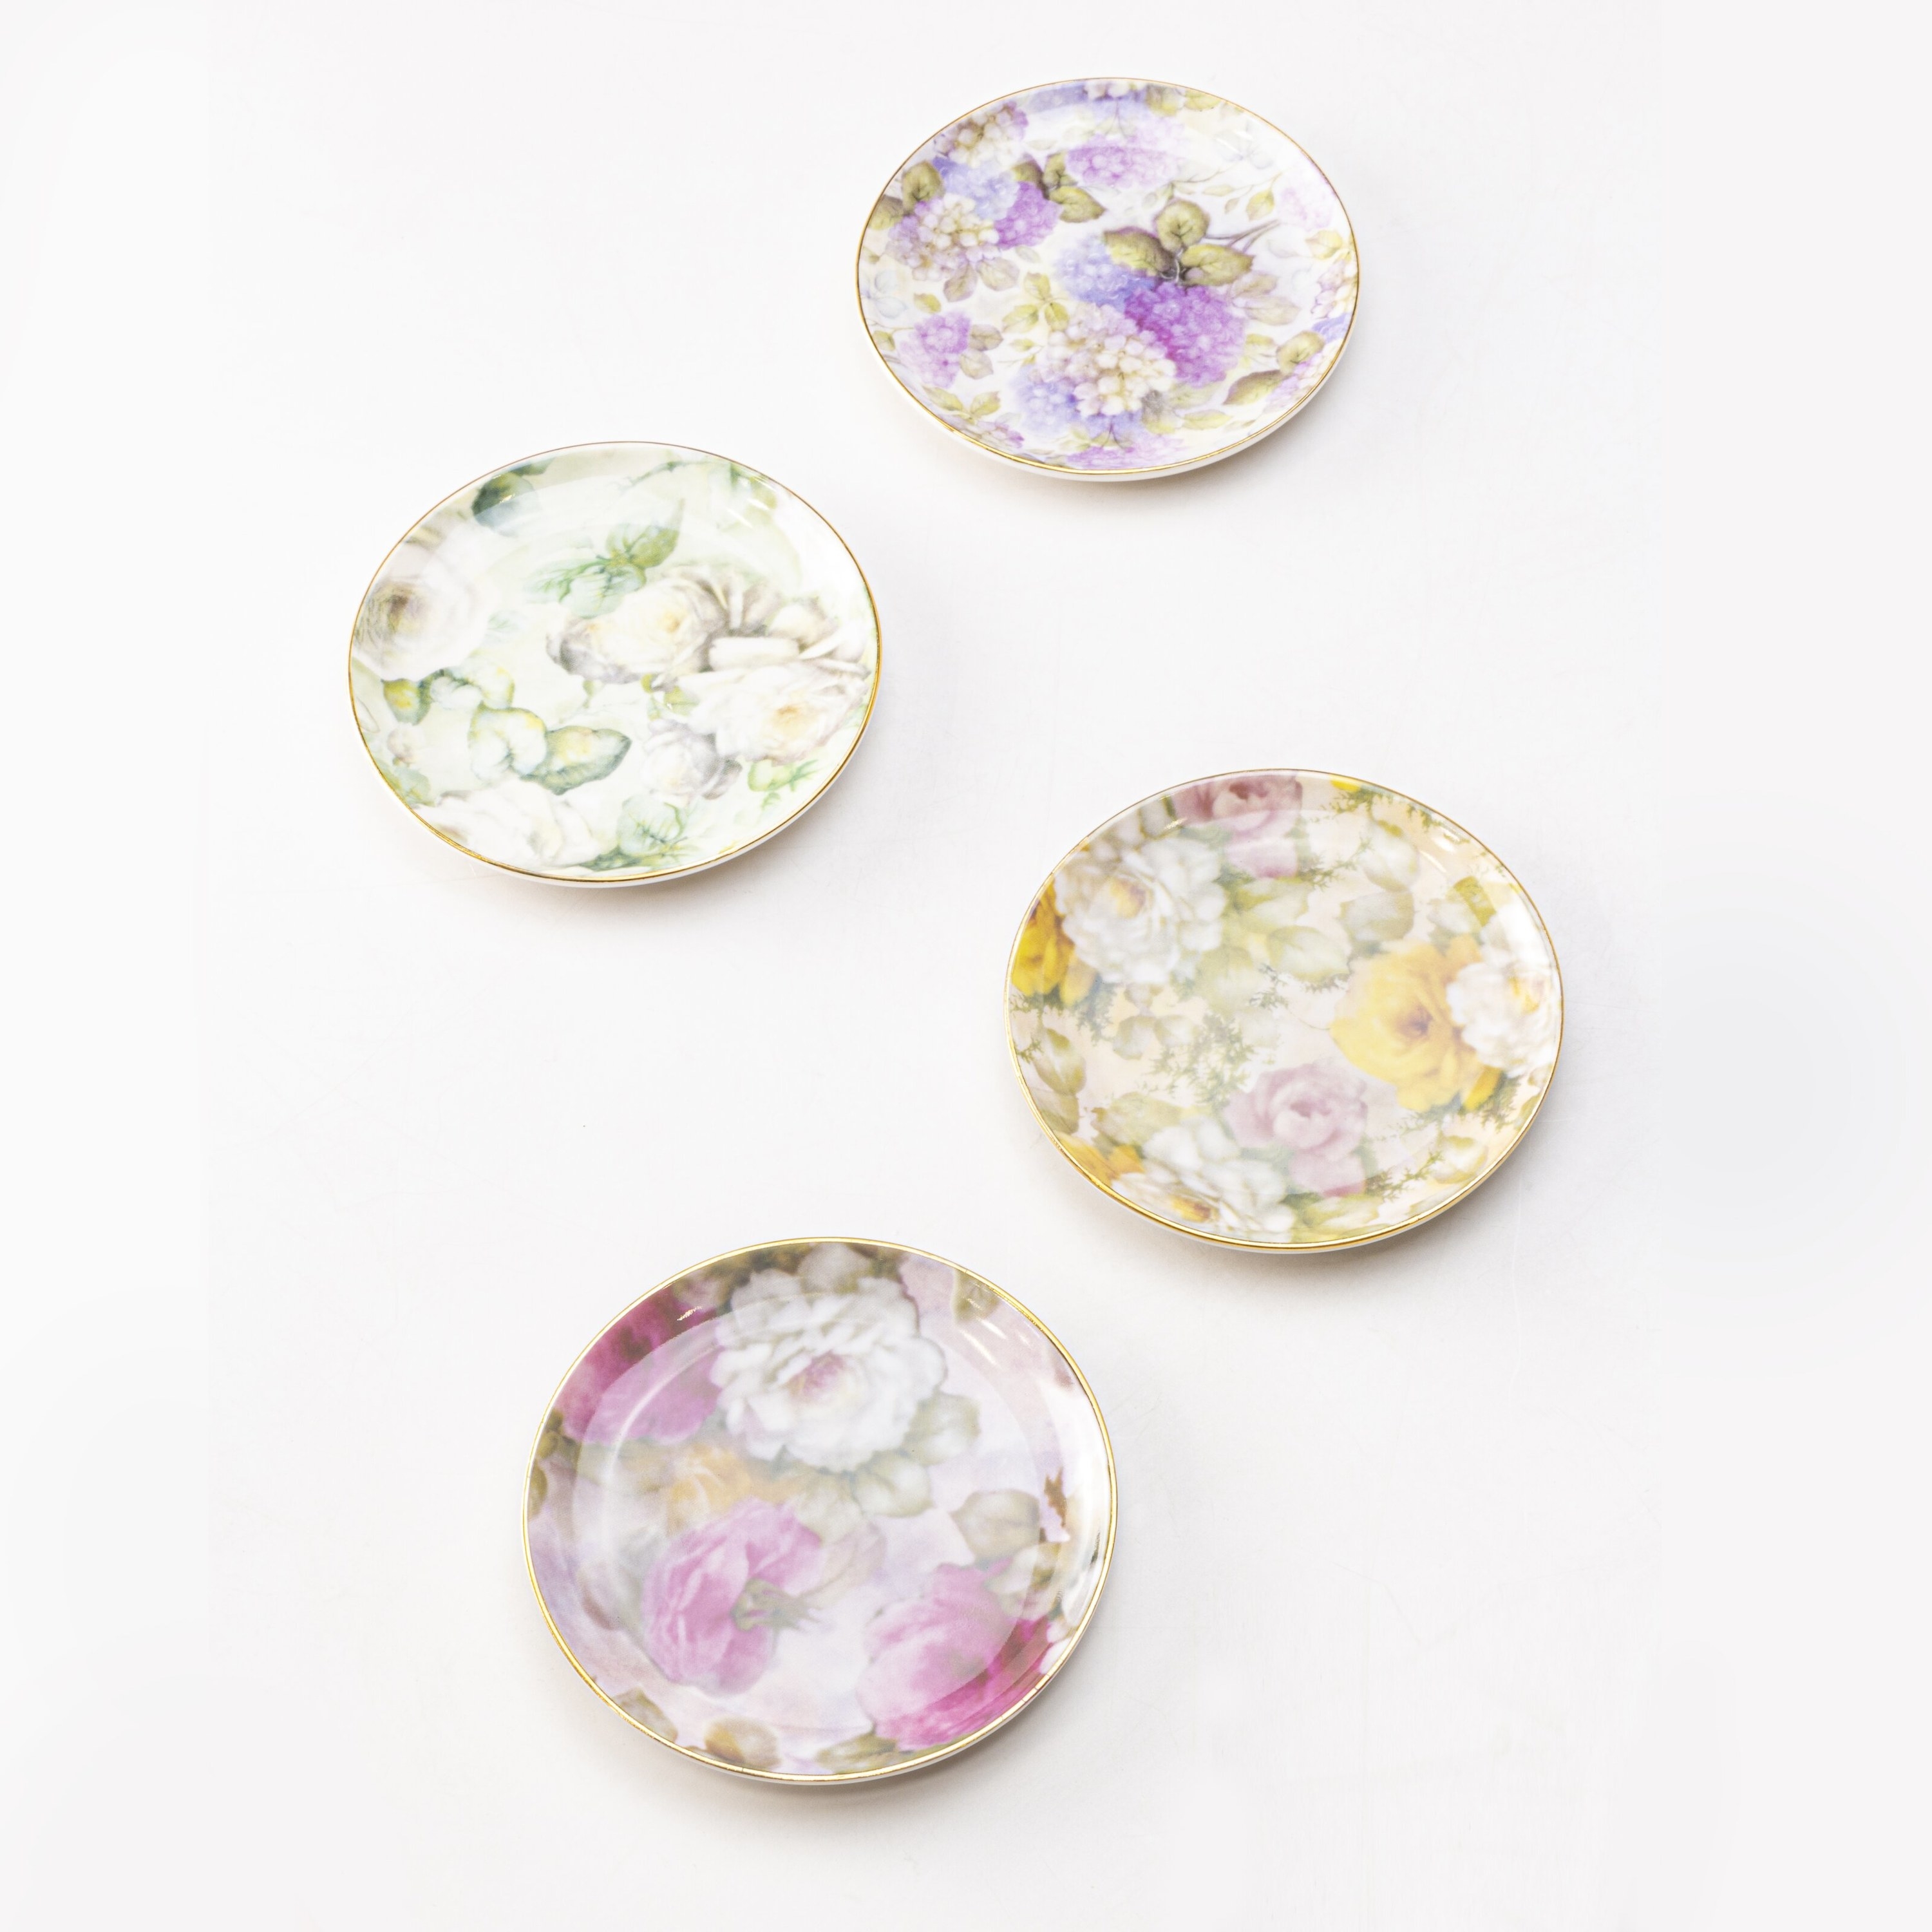 the floral-printed dishes